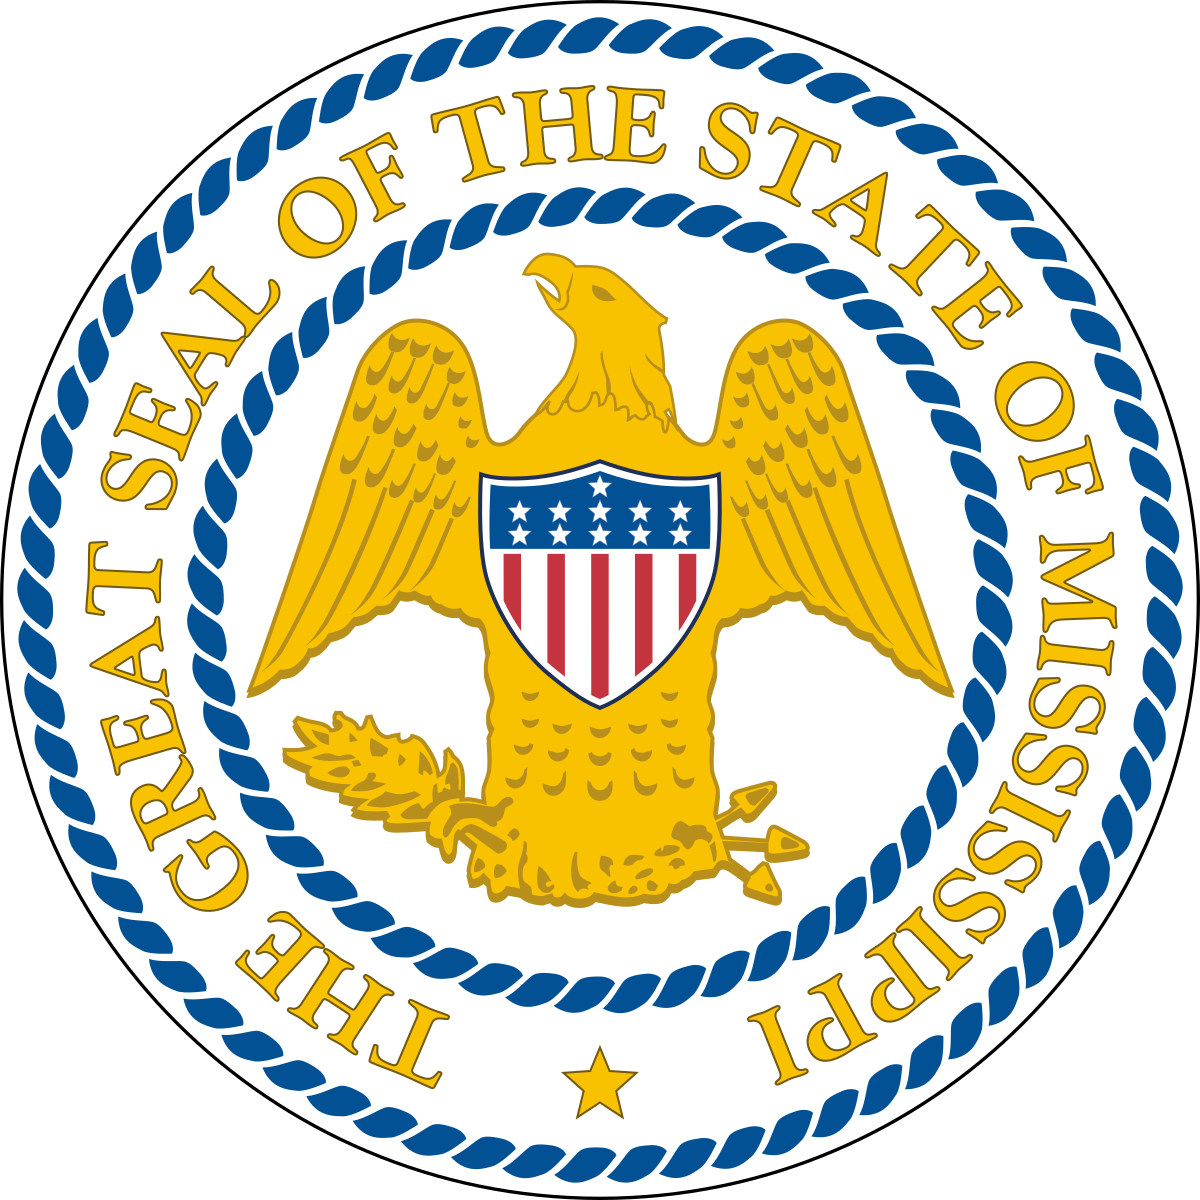 Mississippi state seal